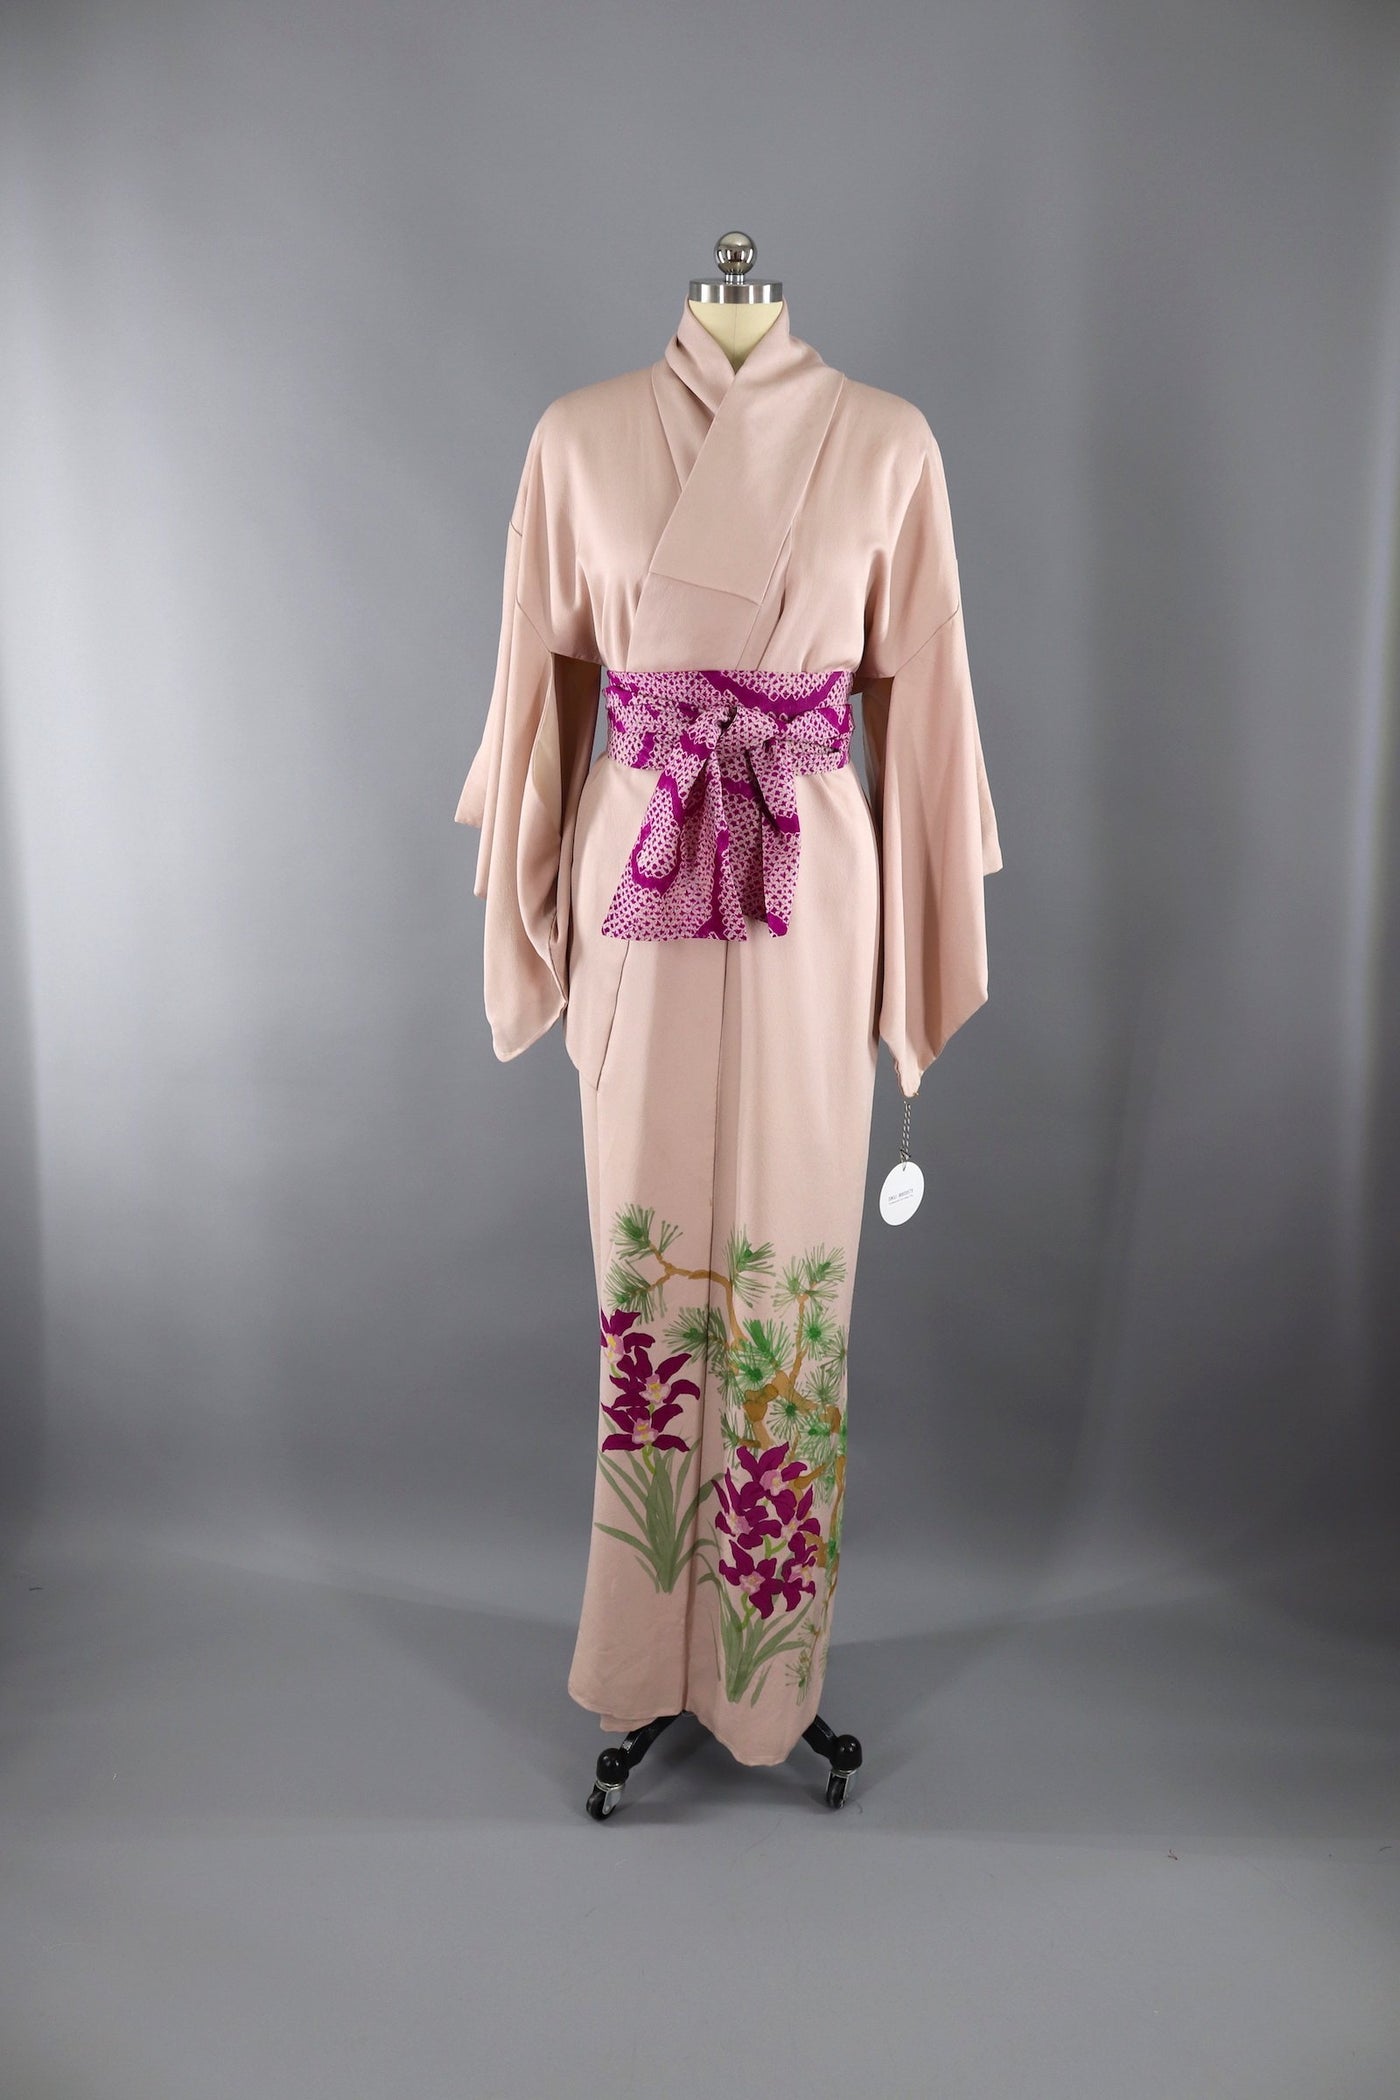 Vintage 1960s Silk Kimono Robe / Pale Pink Orchids Floral Pine Trees Print - ThisBlueBird